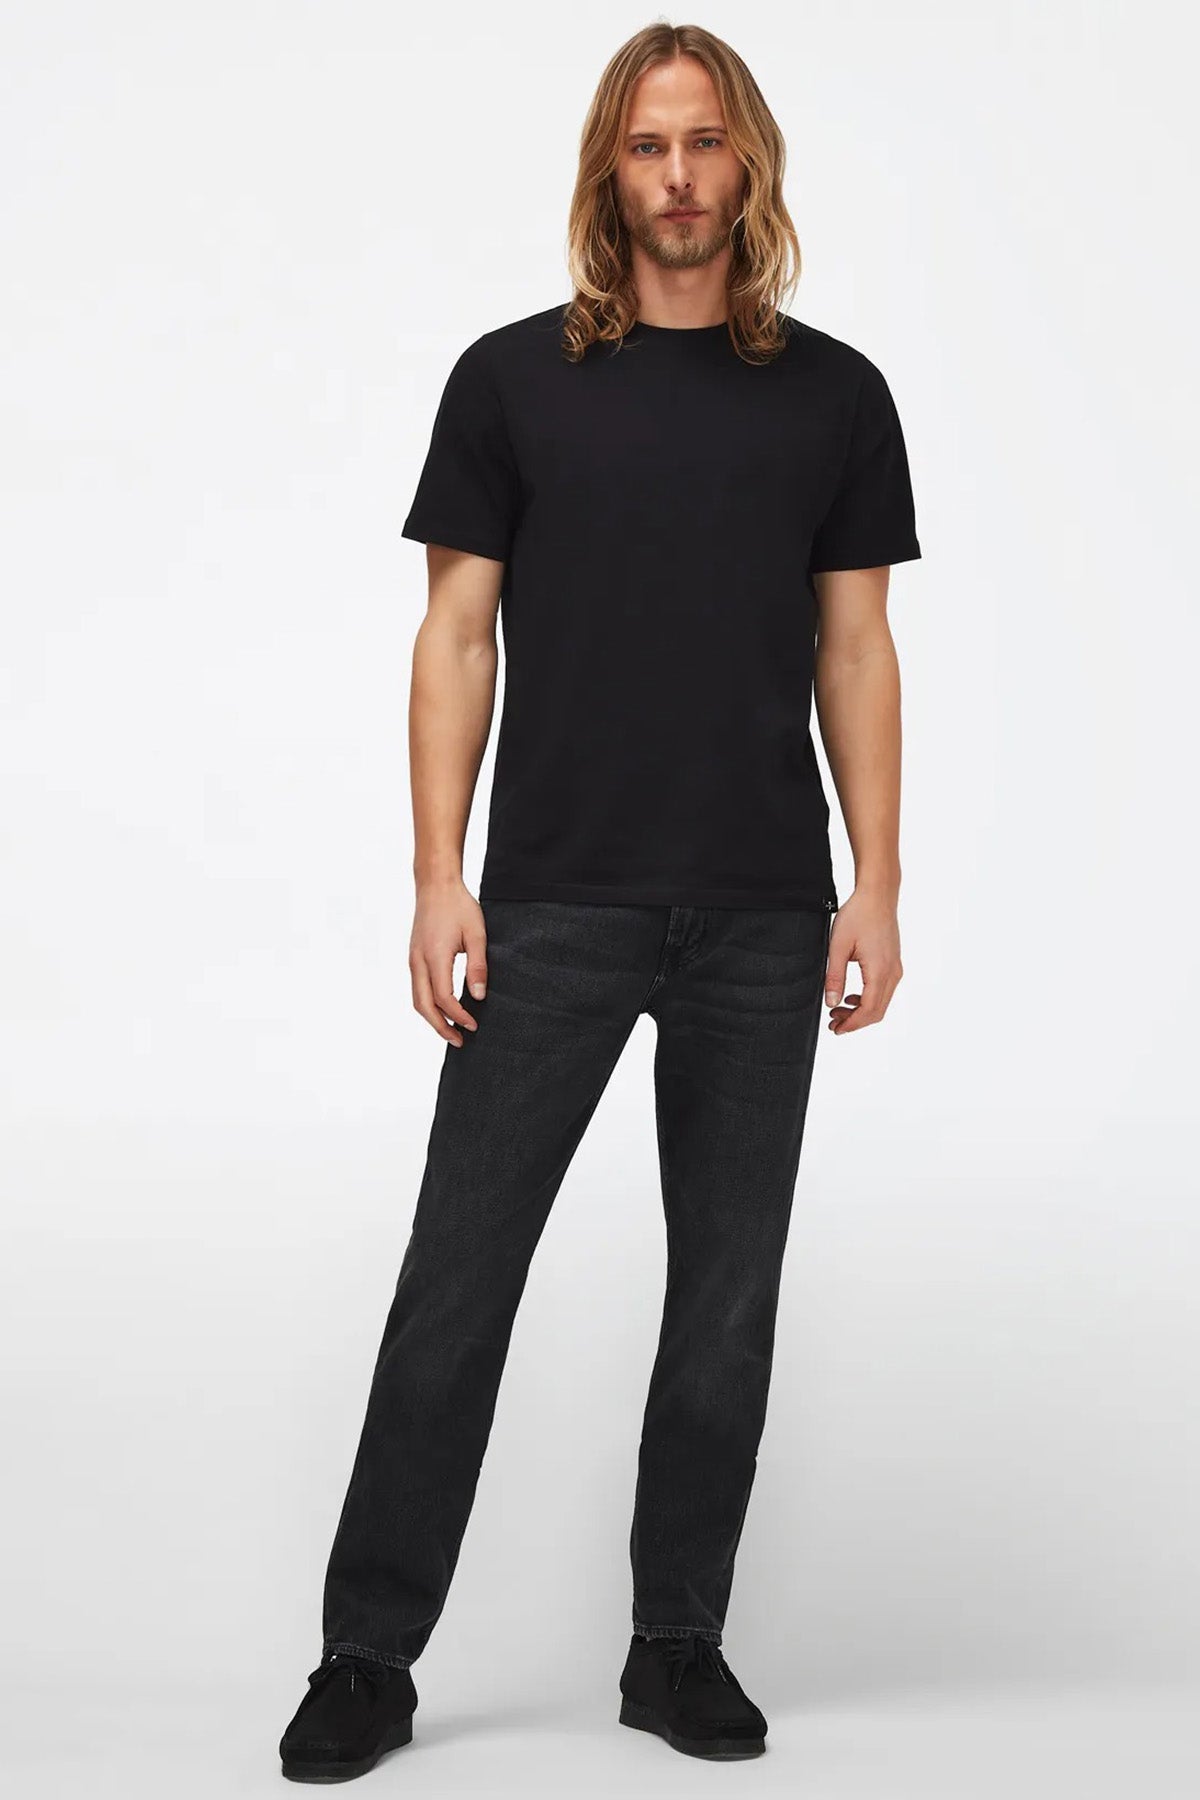 7 For All Mankind Slimmy Tapered Modern Slim Fit Jeans-Libas Trendy Fashion Store